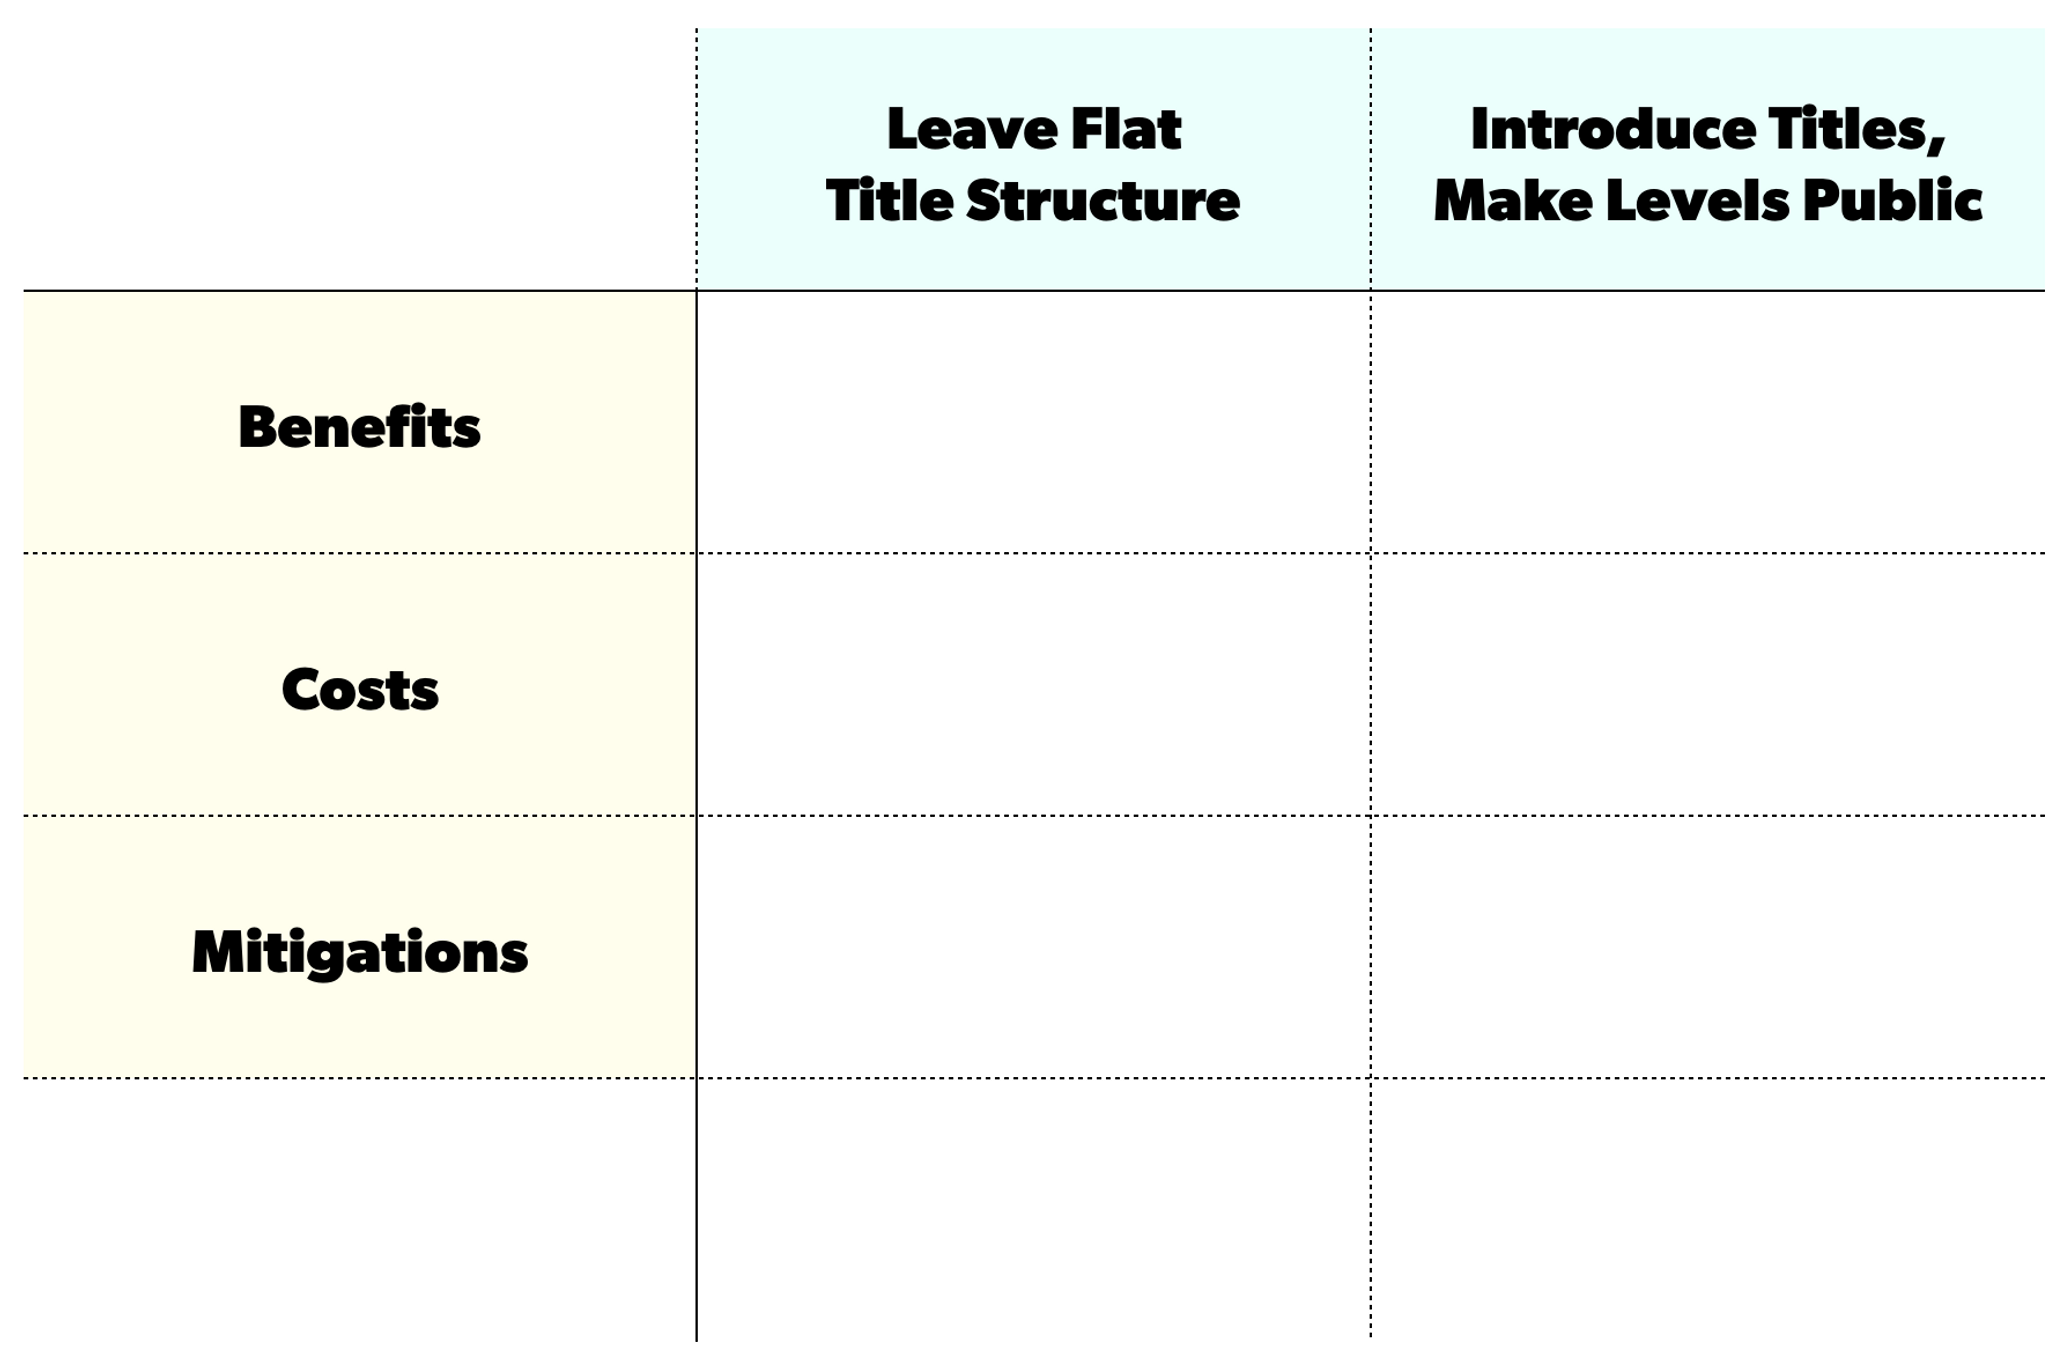 Chart with benefits, costs and mitigations on one axis, and Option A (Leave flat title structure) and Option B (Introduce titles, make levels public) on the other